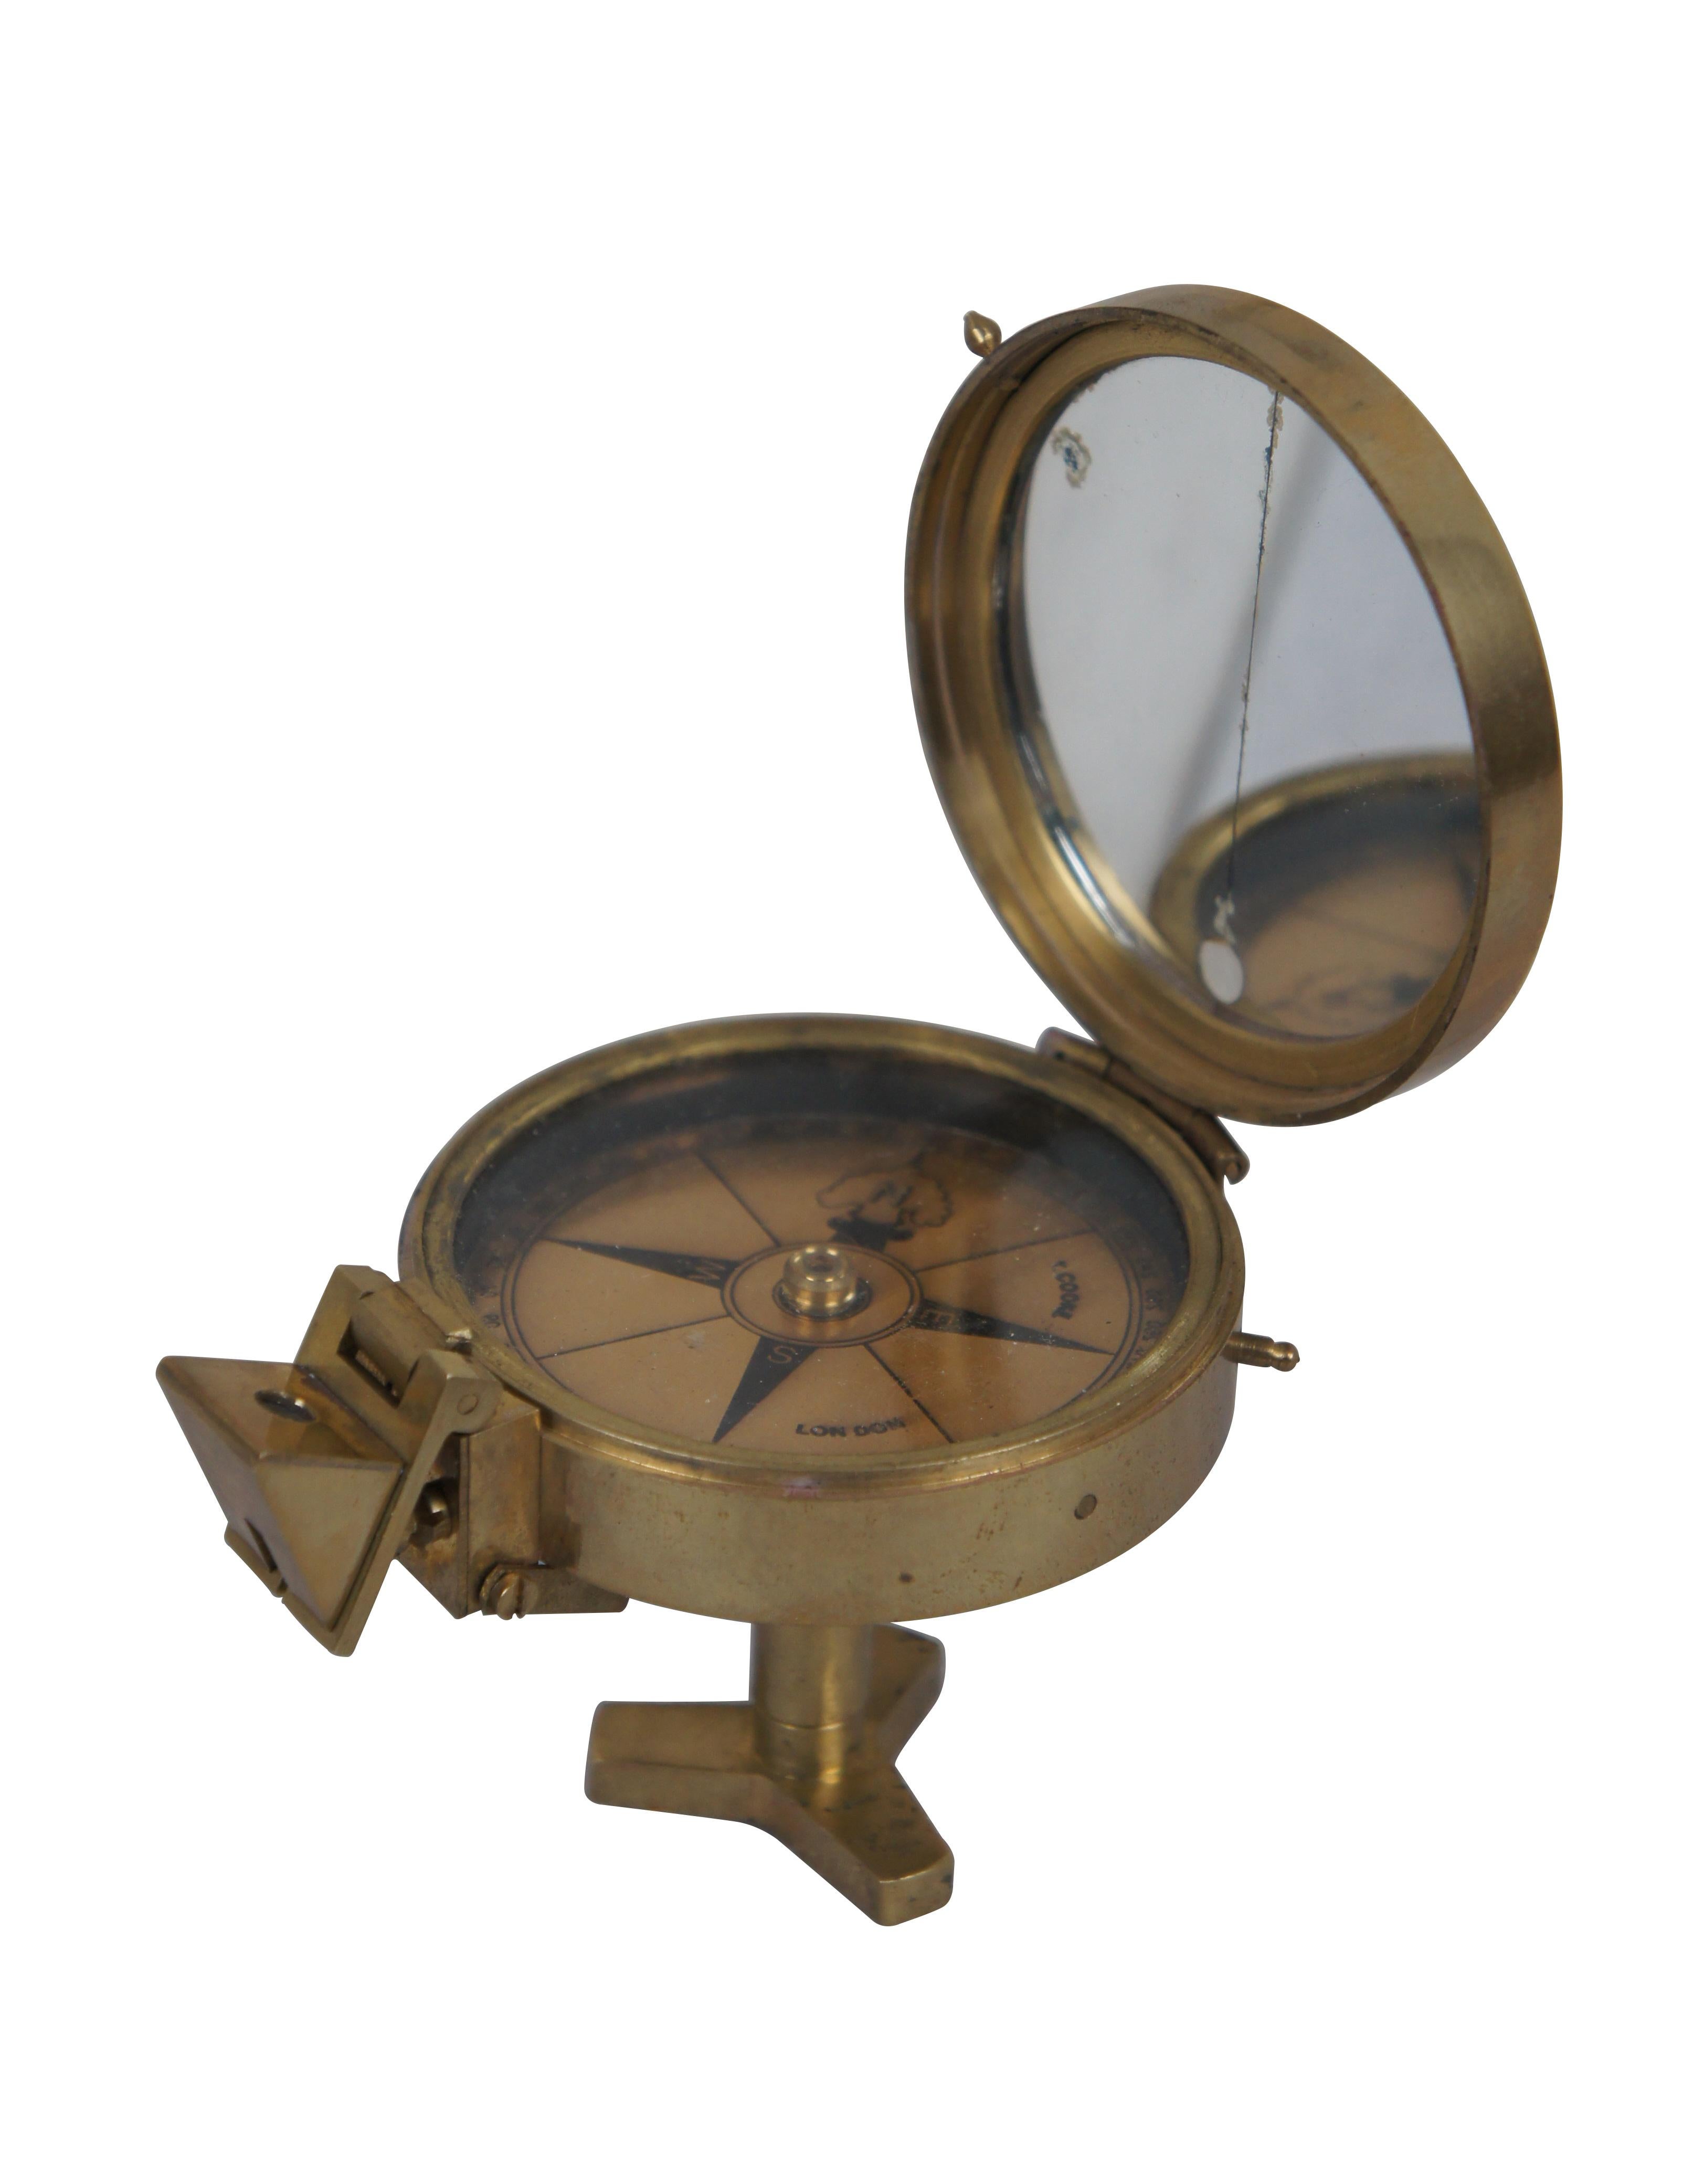 Vintage T. Cooke of London England prismatic compass. Brass case with mirrored lid interior, folding prism, metallic brass face, and short stand able to be screwed onto a tripod for stabilization.

